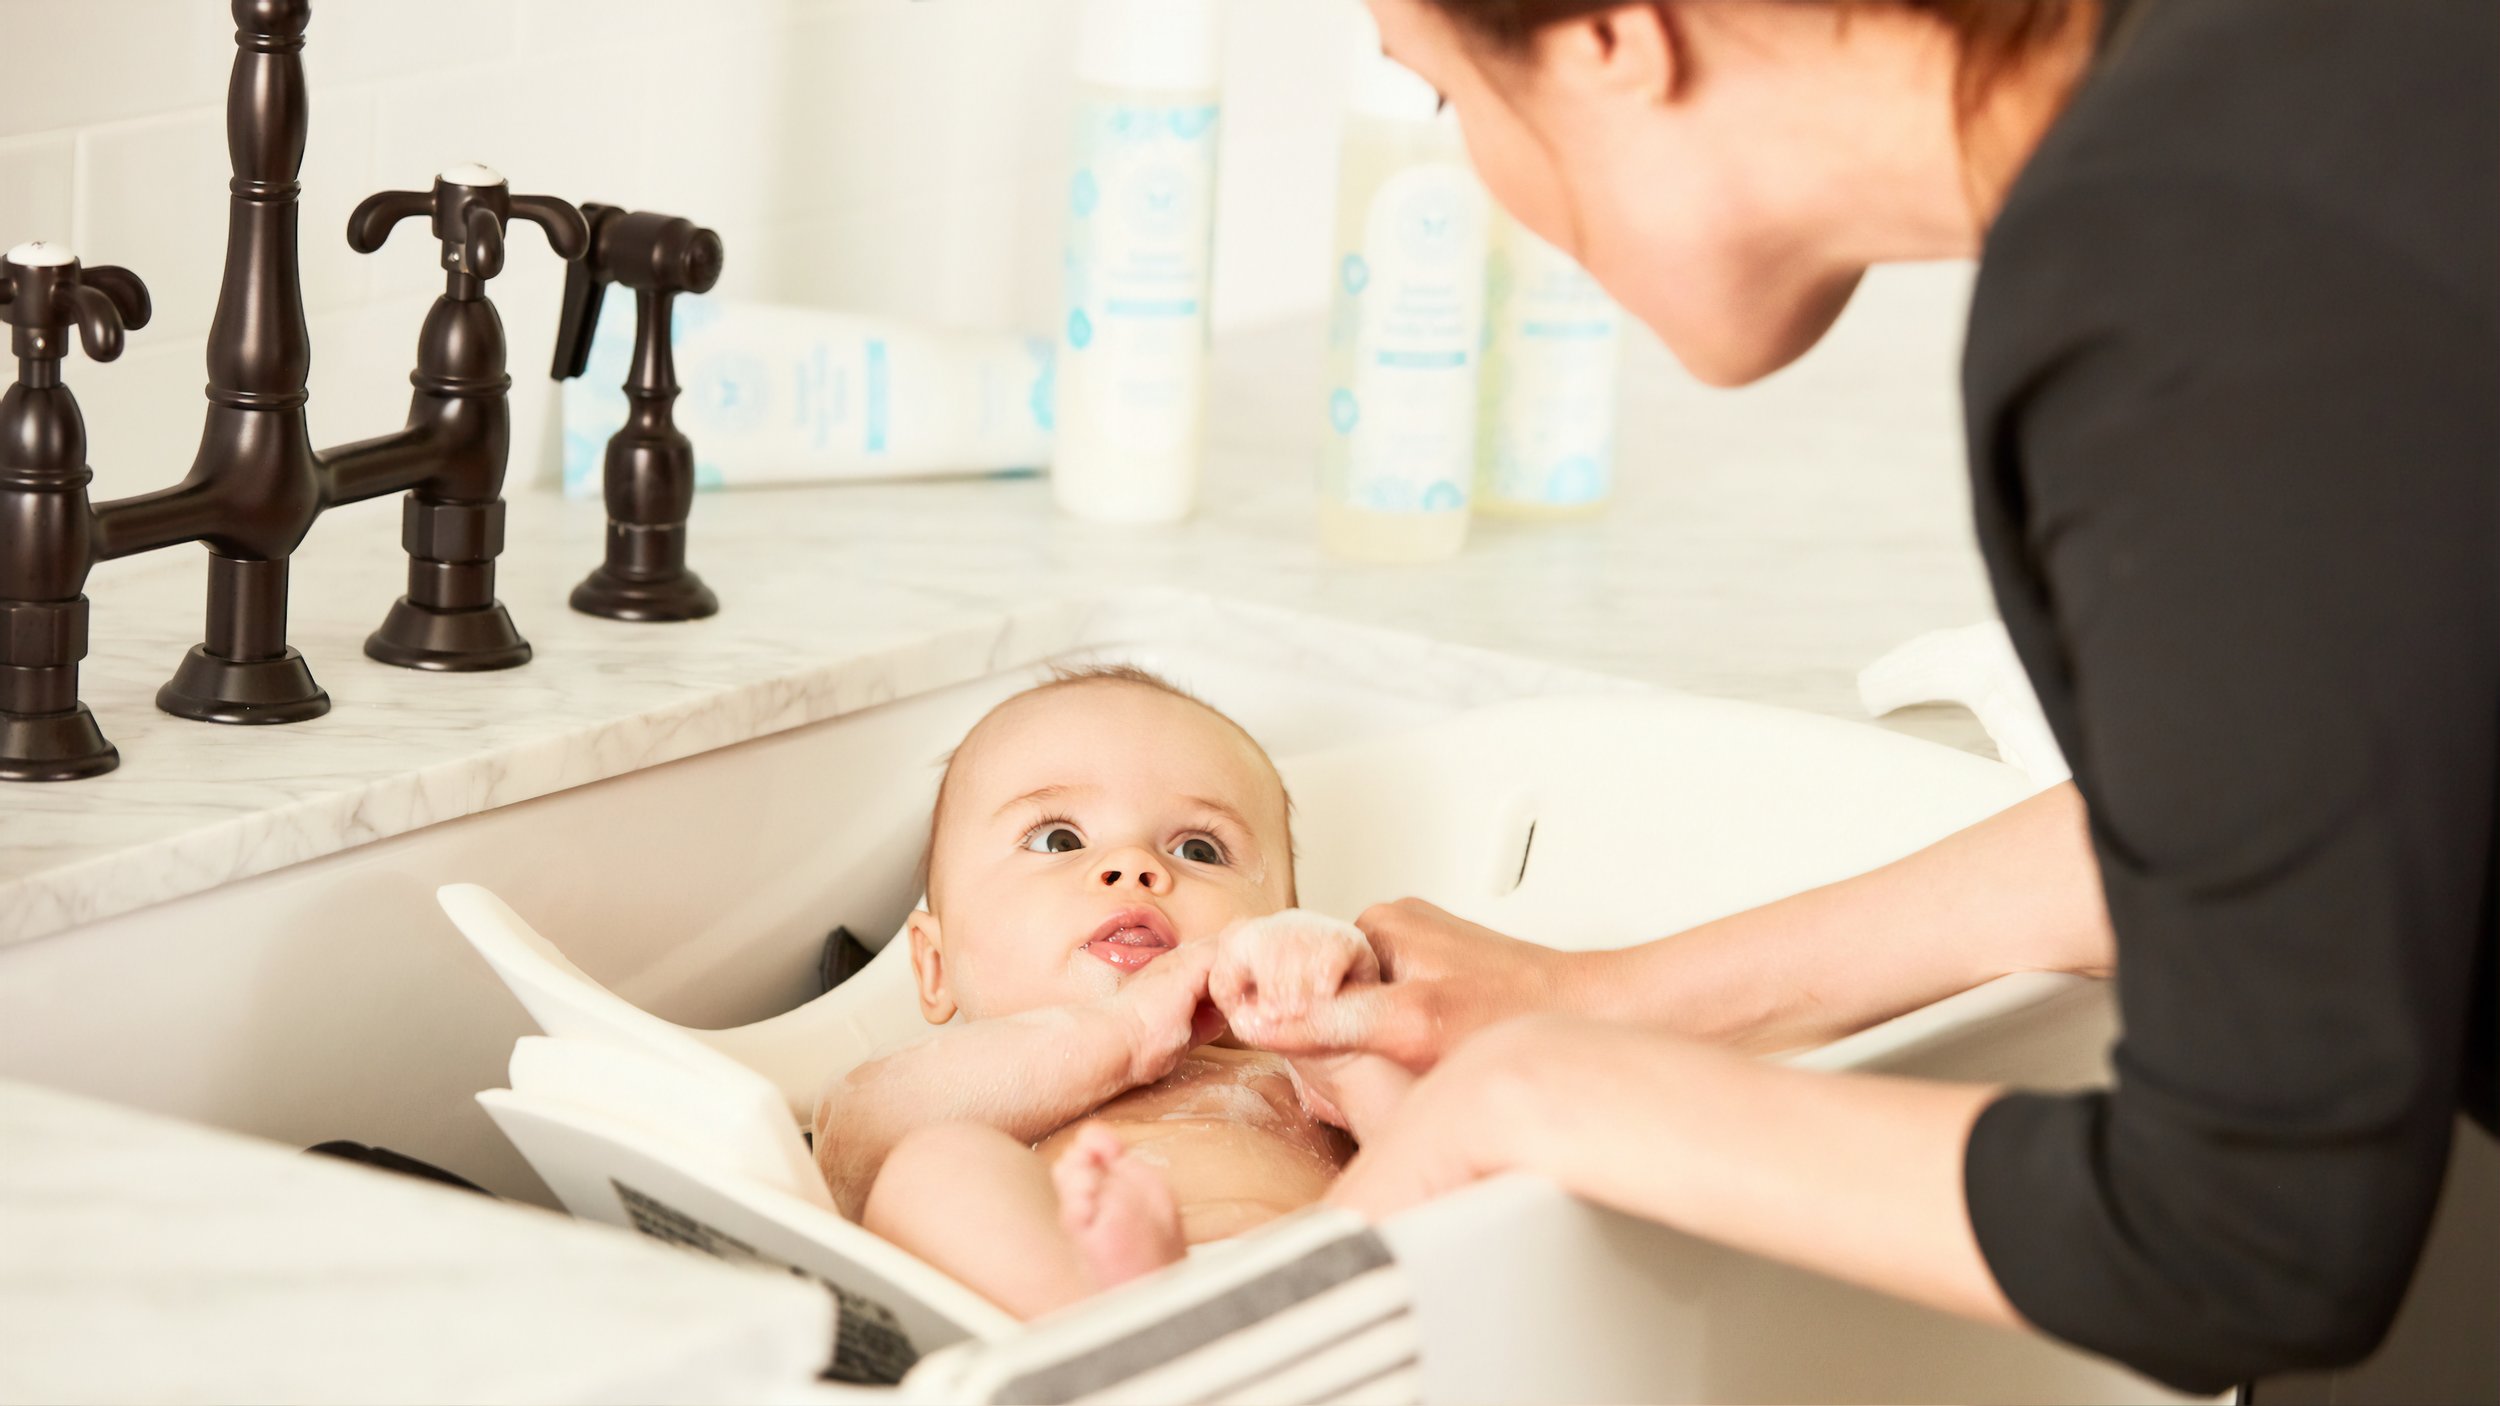 Quick Guide to the Non-Toxic Baby Bath